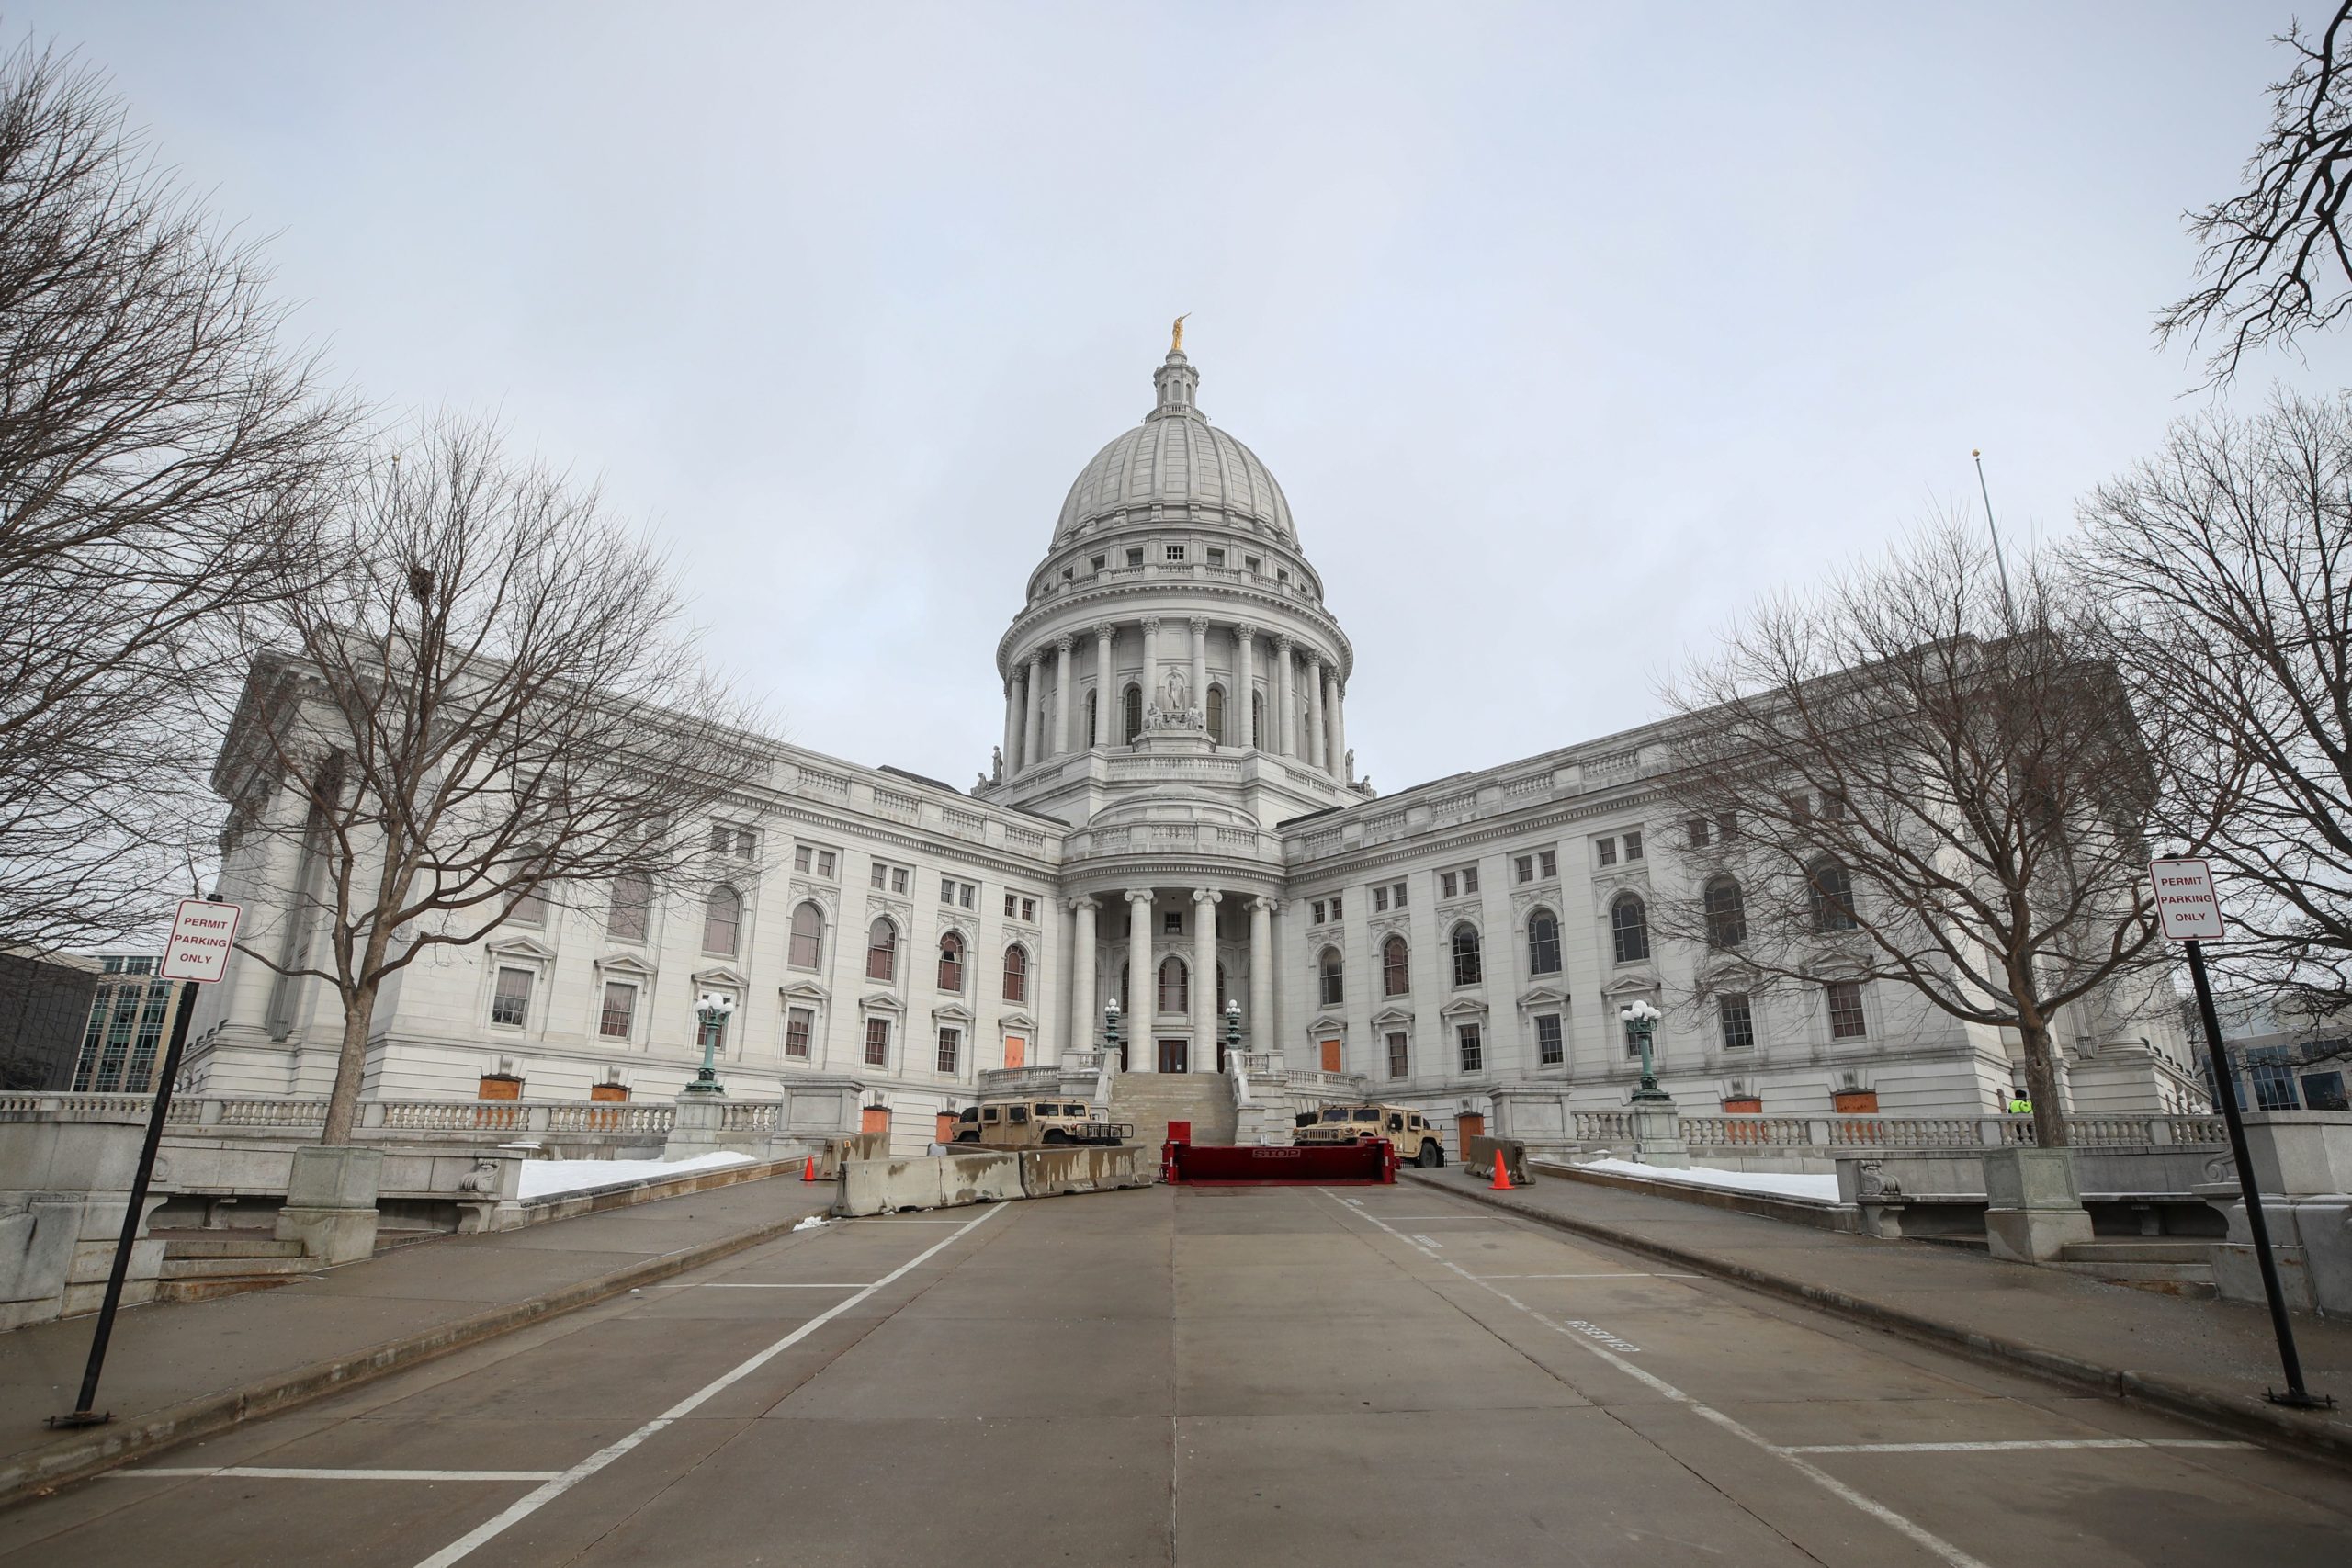 Barricades are seen in front of the State Capitol in Madison, Wisconsin, on January 17, 2021, during a nationwide protest called by anti-government and far-right groups supporting US President Donald Trump and his claim of electoral fraud in the November 3 presidential election. - The FBI warned authorities in all 50 states to prepare for armed protests at state capitals in the days leading up to the January 20 presidential inauguration of President-elect Joe Biden. (Photo by KAMIL KRZACZYNSKI / AFP) (Photo by KAMIL KRZACZYNSKI/AFP via Getty Images)